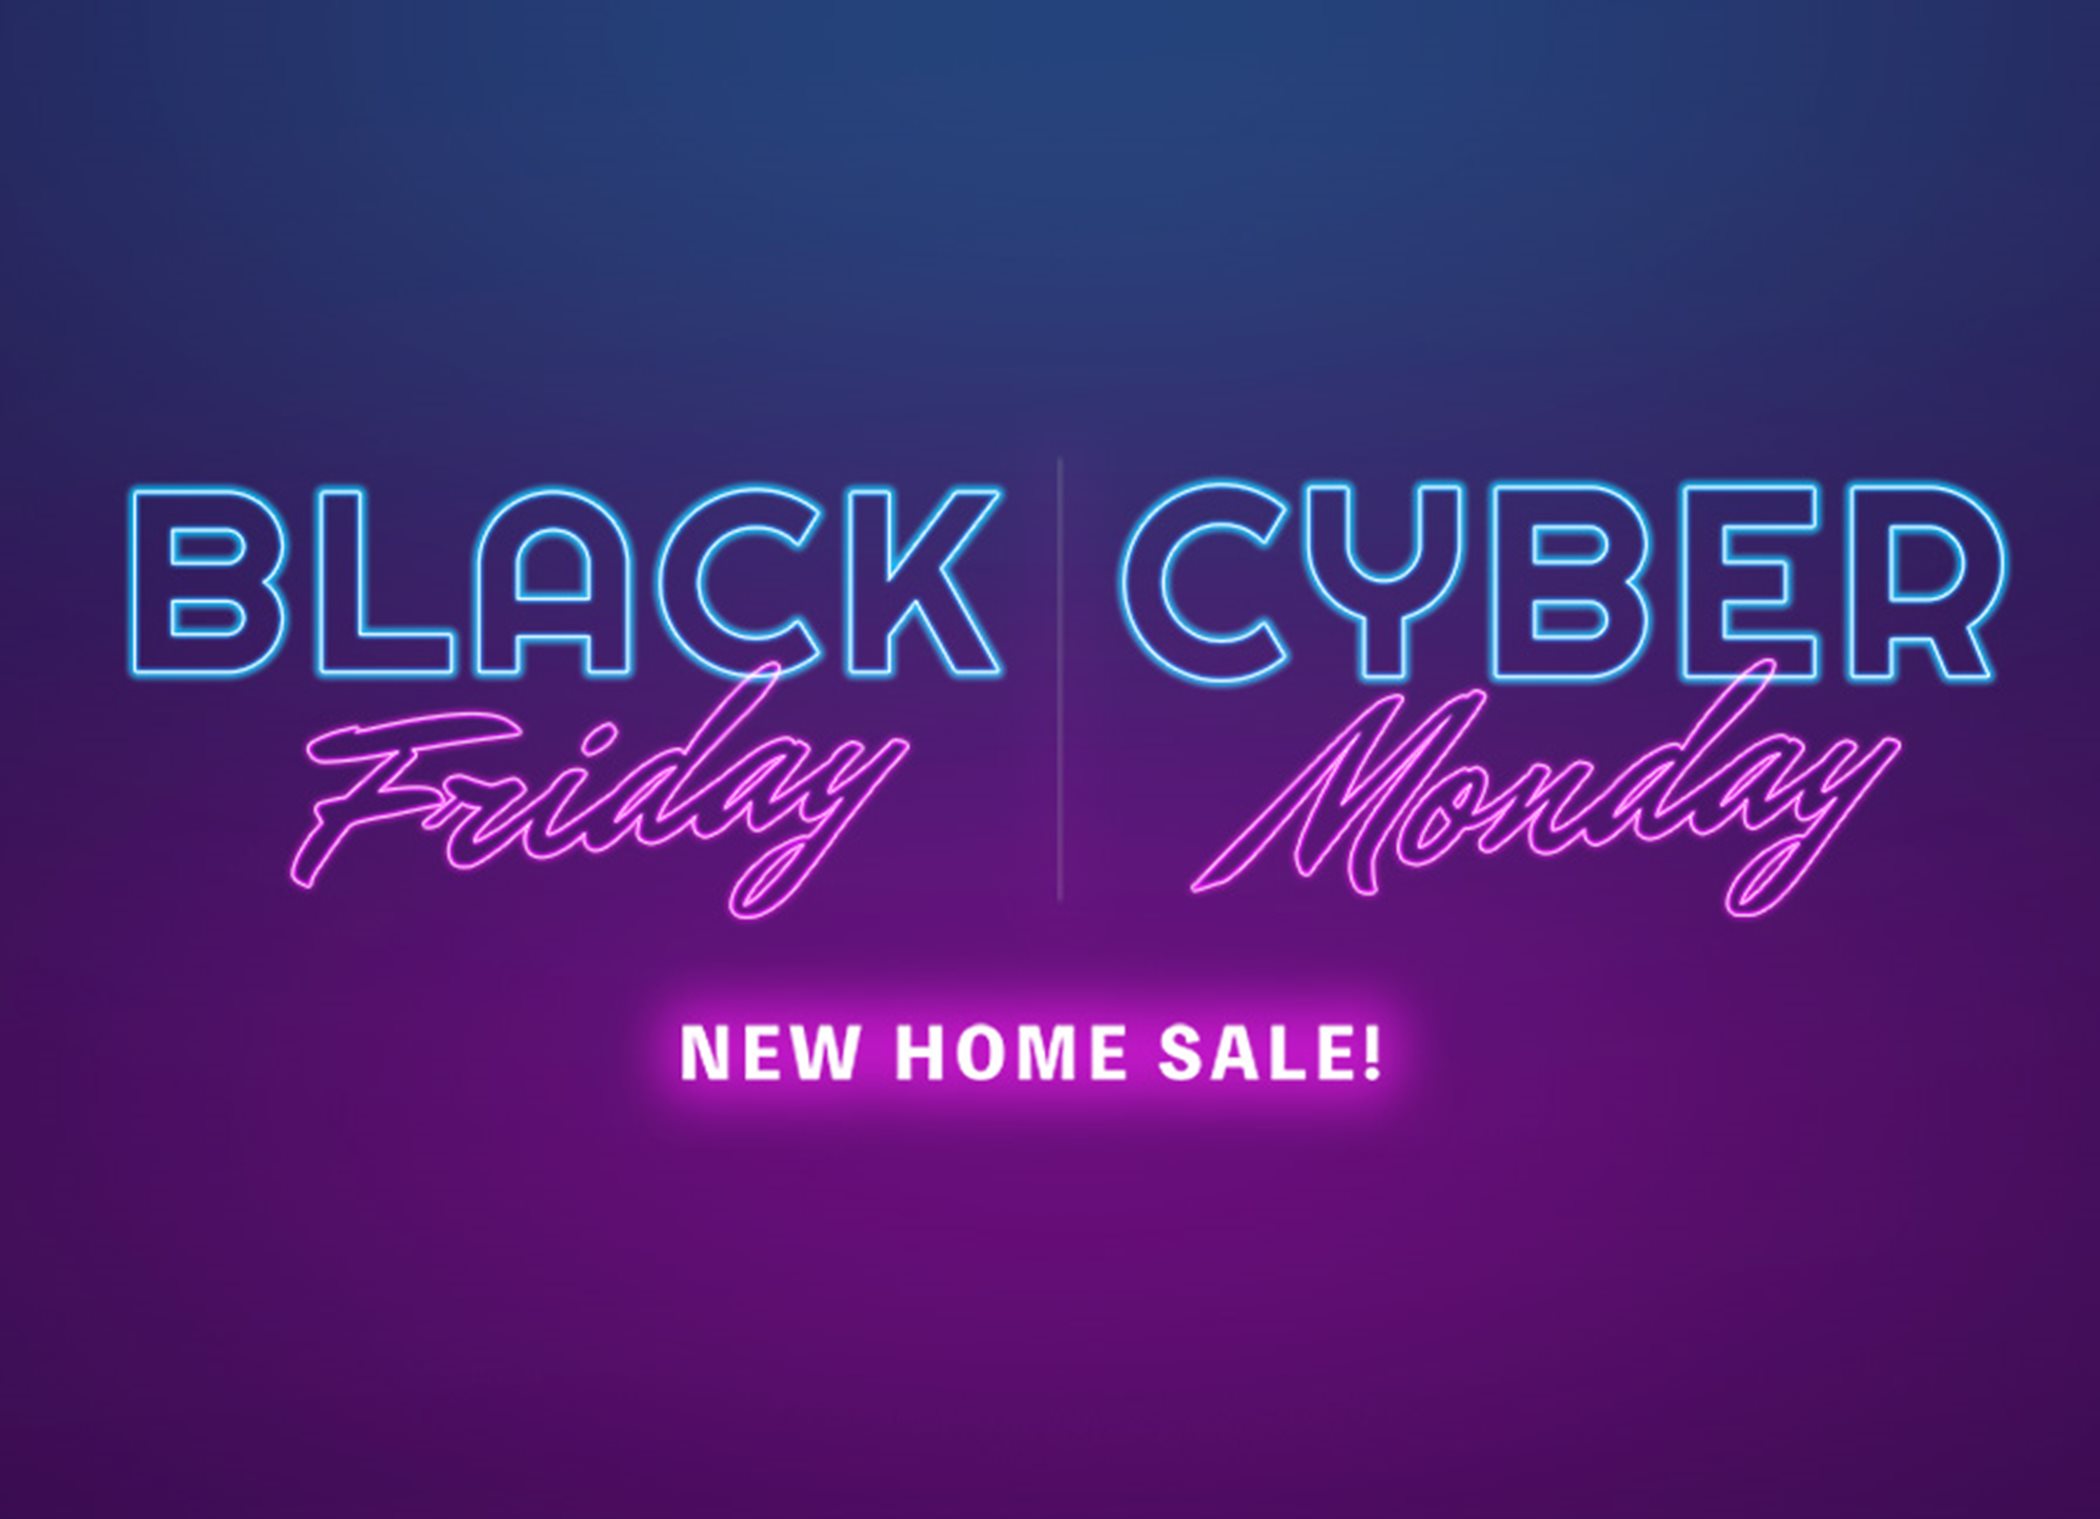 Black Friday | Cyber Monday New Home Sale!